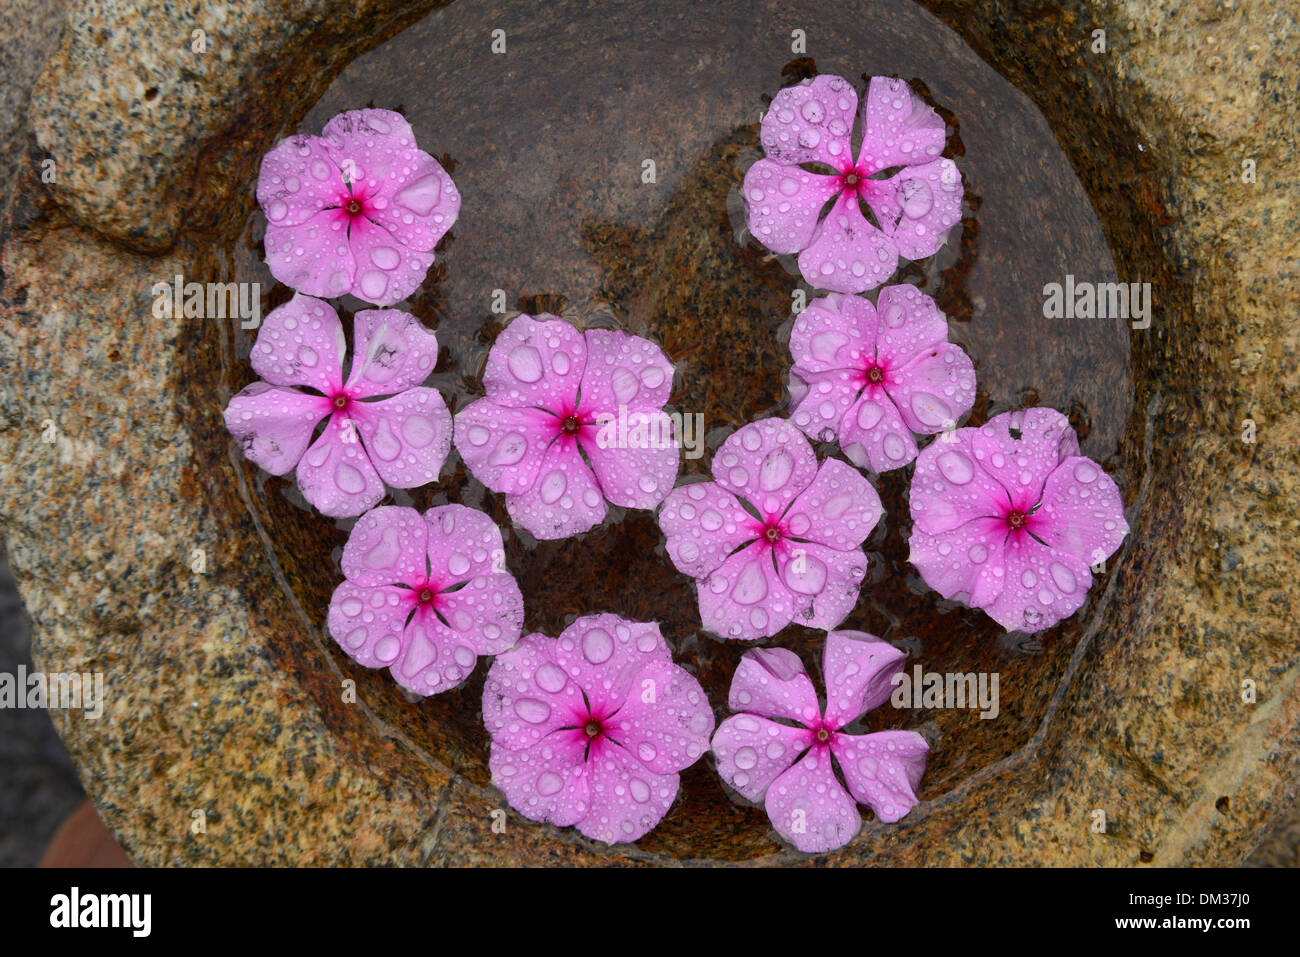 South America, Brazil, Buzios, flowers, detail, relax, spa, pink, Stock Photo